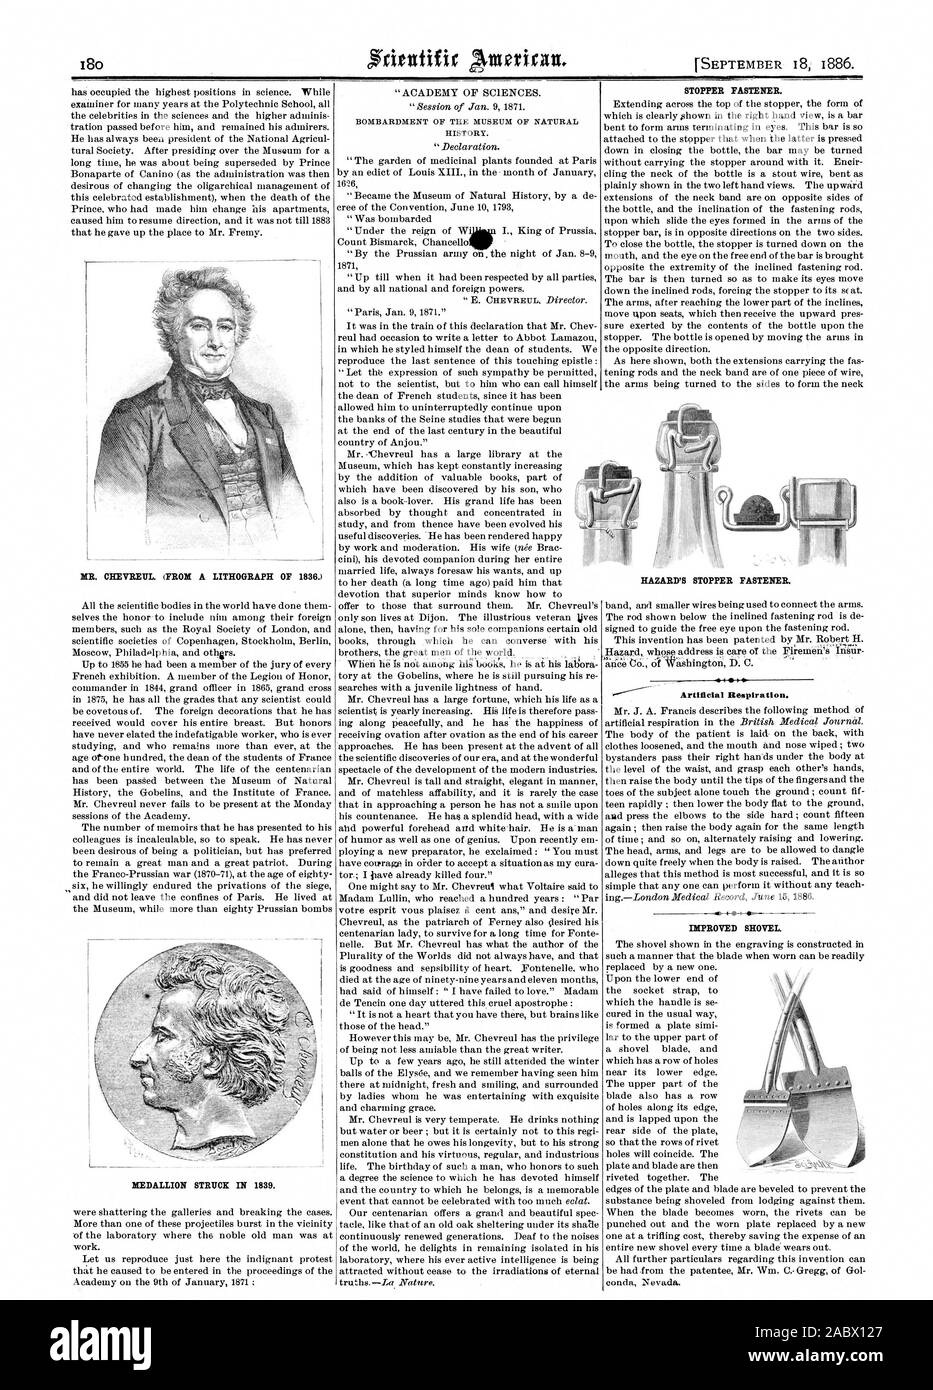 BOMBARDMENT OF THE MUSEUM OF NATURAL HISTORY. STOPPER FASTENER. Artificial Respiration. IMPROVED SHOVEL MR. CHEVREIIL. (FROM A LITHOGRAPH OF 1836.) MEDALLION STRUCK IN 1839. HAZARD'S STOPPER FASTENER., scientific american, 1886-09-18 Stock Photo